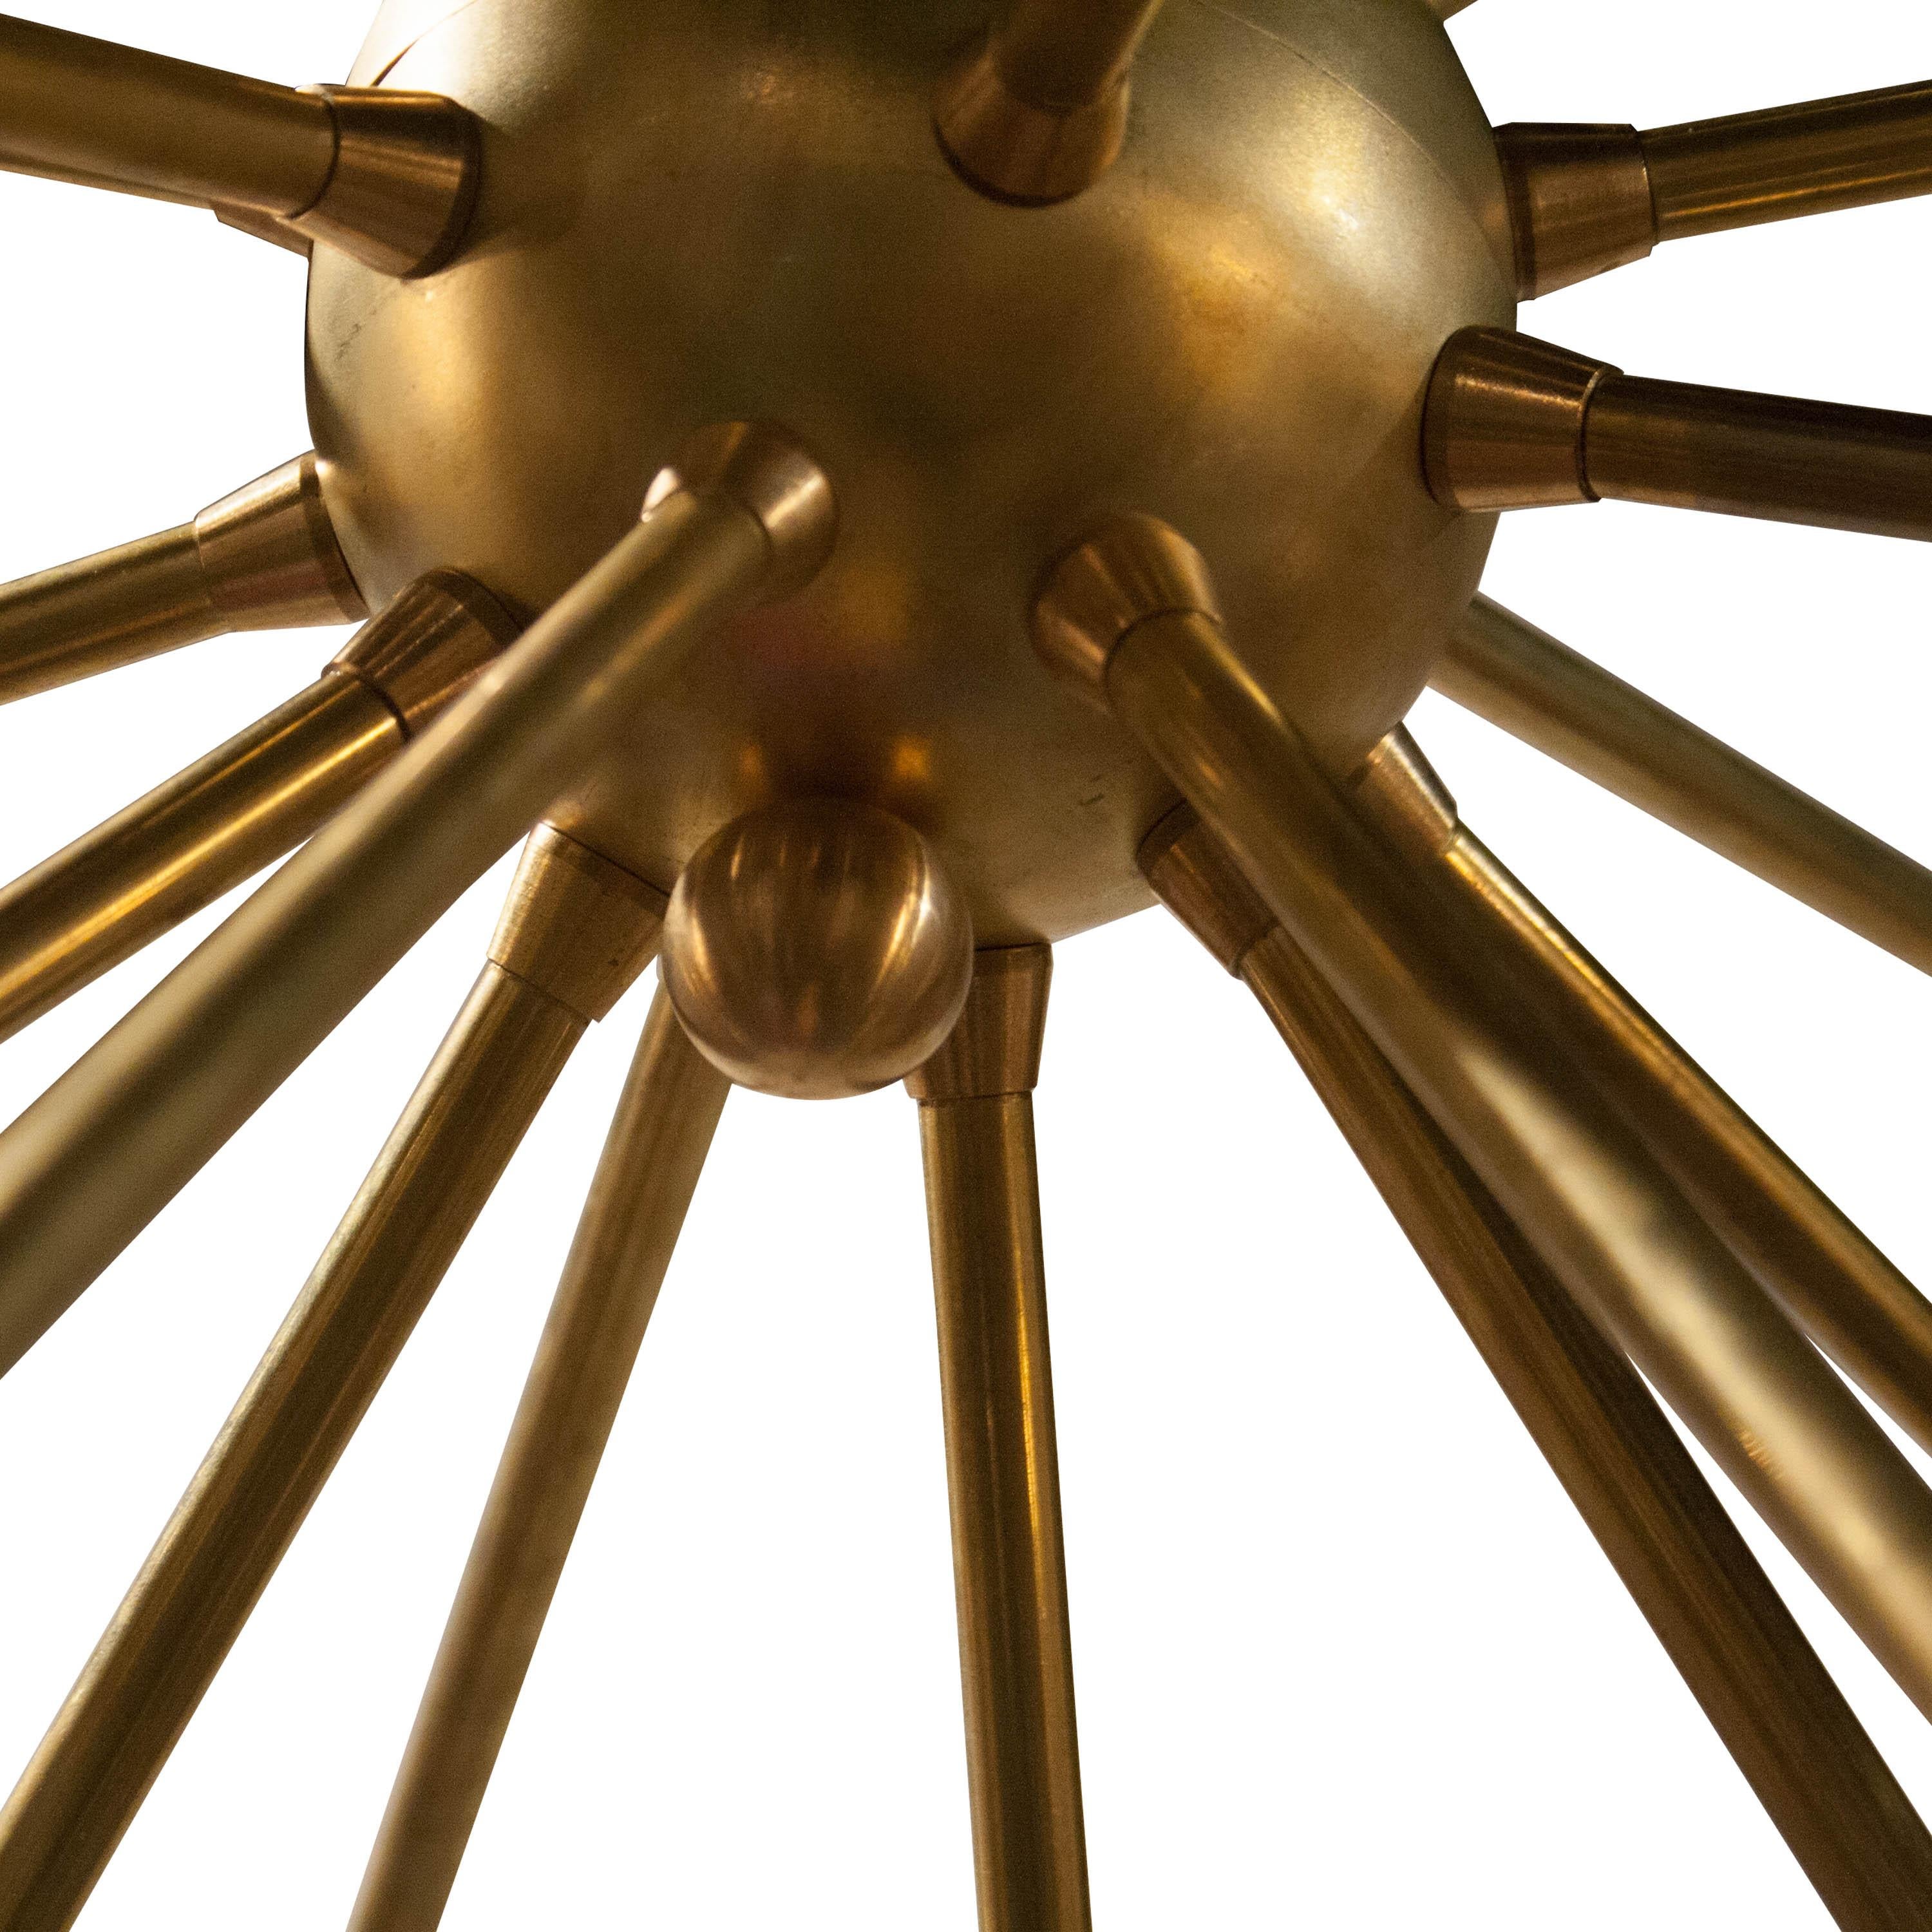  IKB191 Contemporary Sputnik Style Brass Glass Suspension Lamp, Spain, 2020 In New Condition For Sale In Madrid, ES